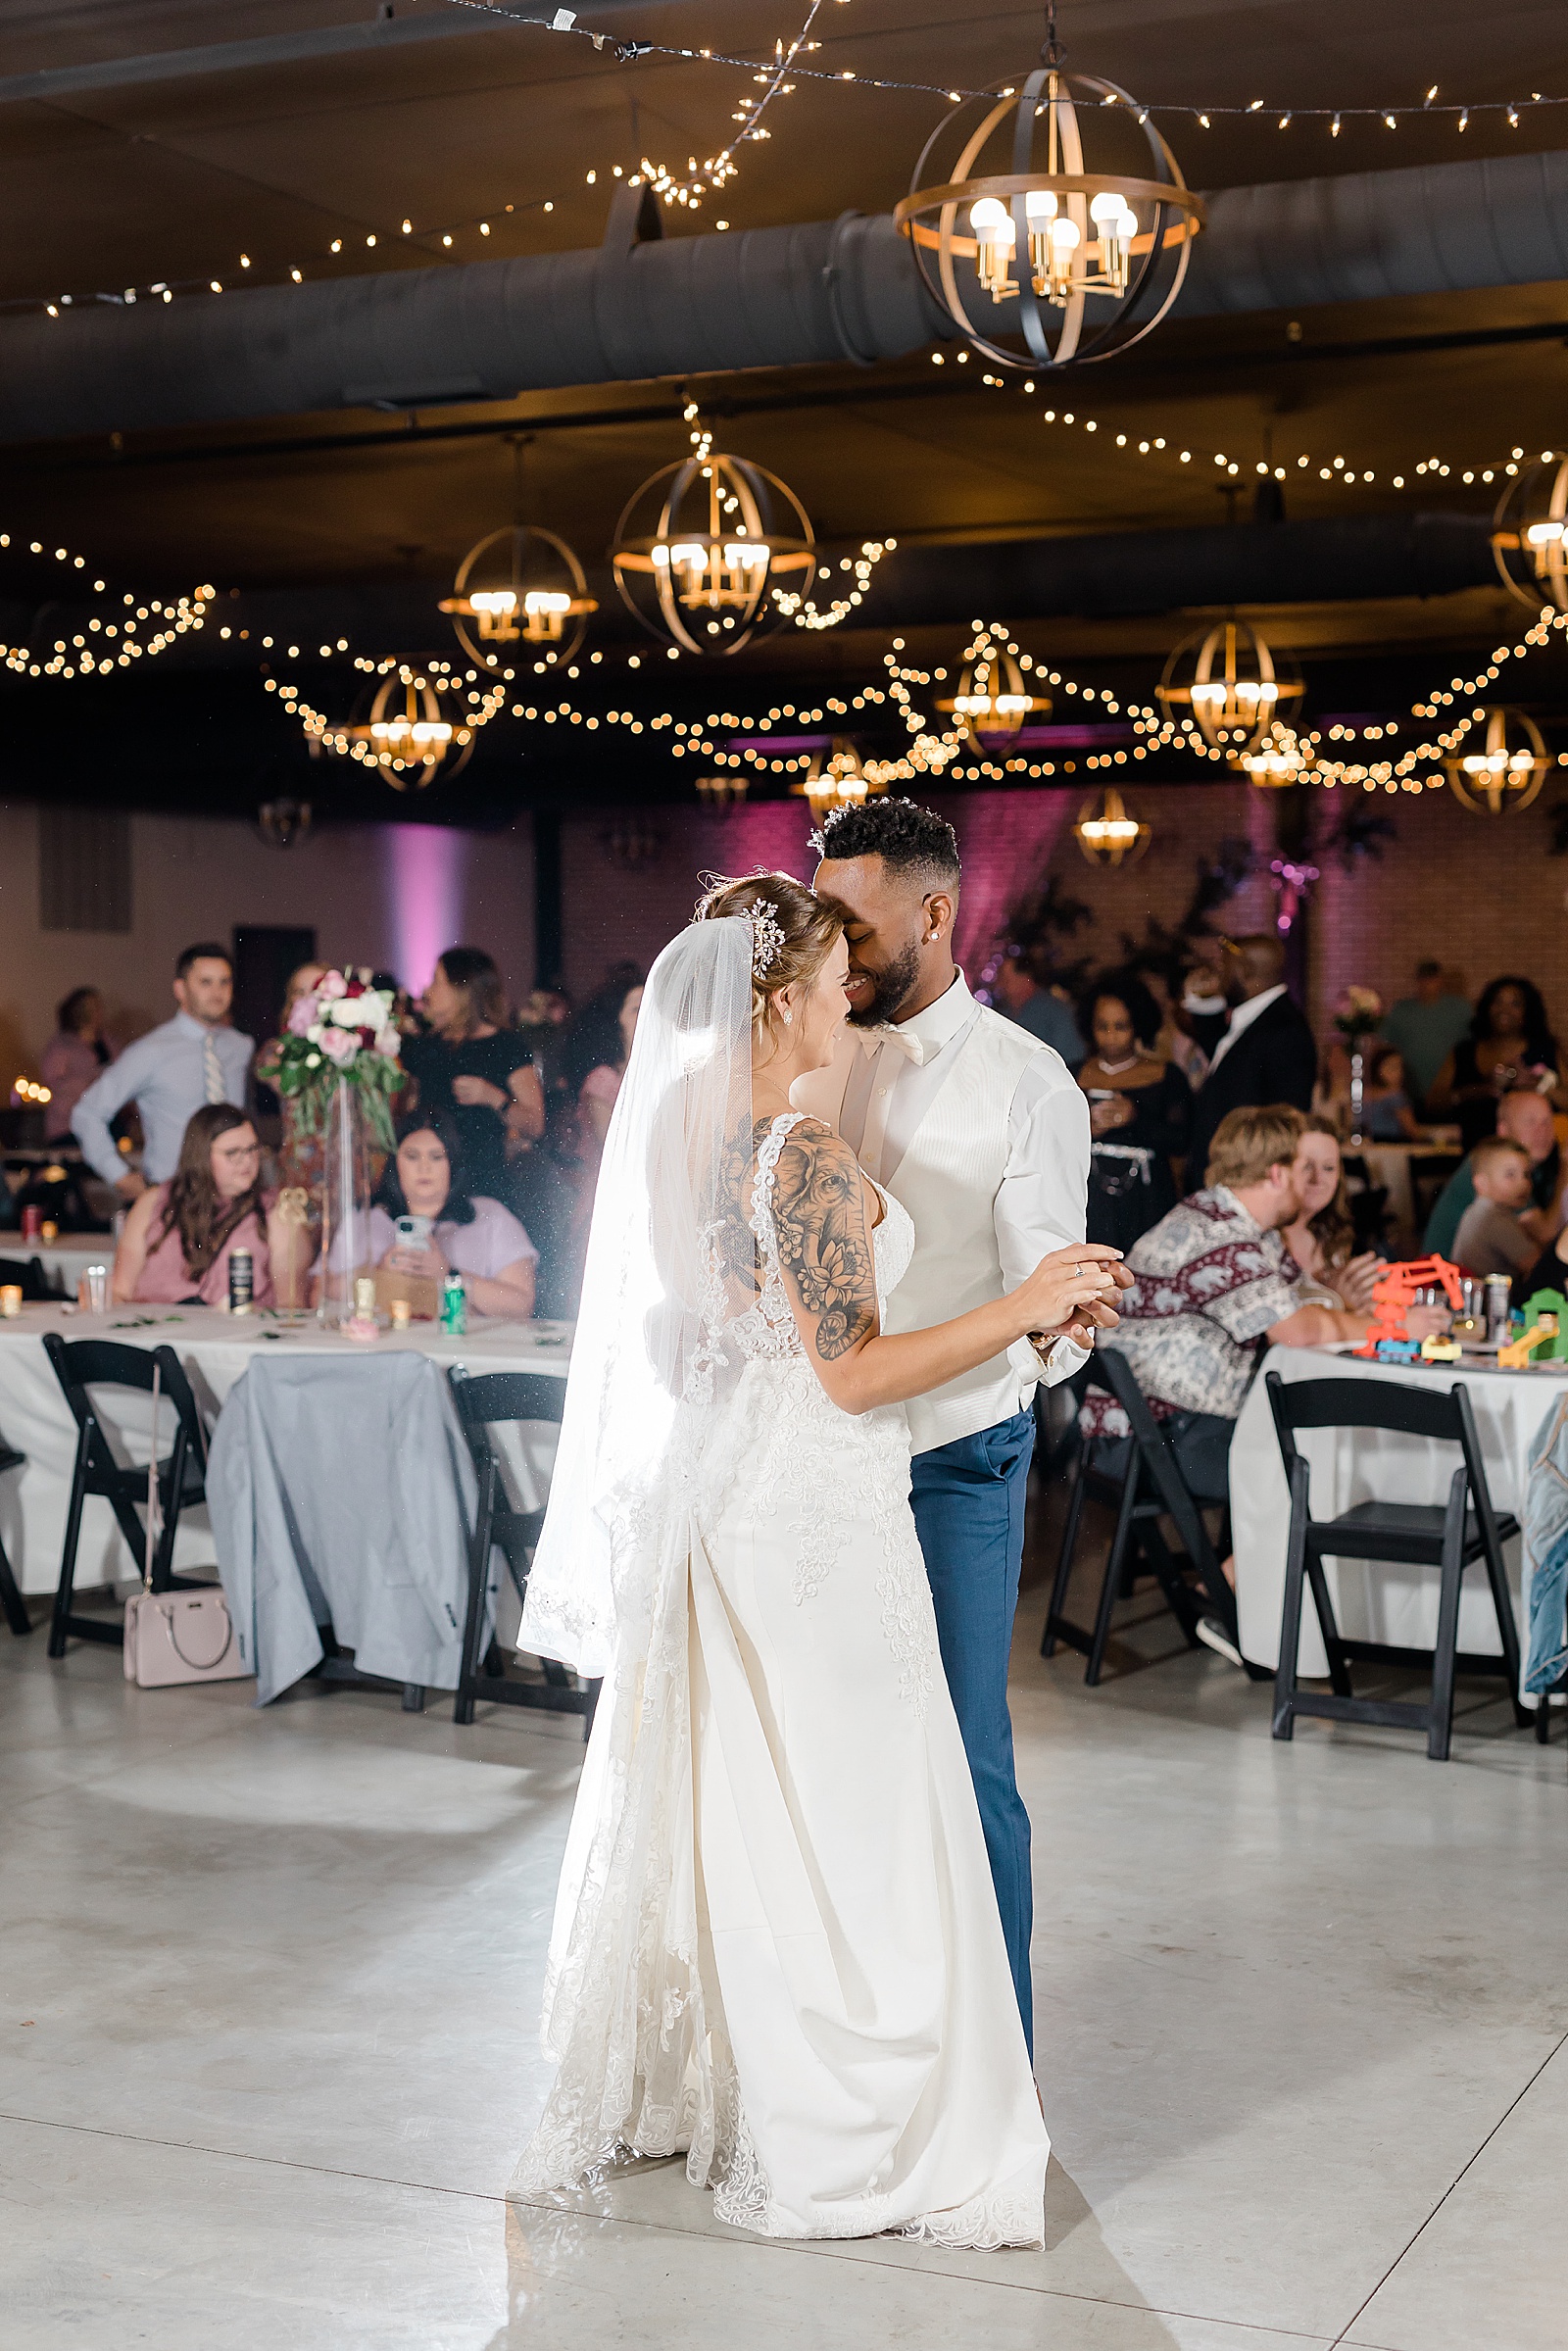 Bride and groom share a first dance in front of their guests at reception 